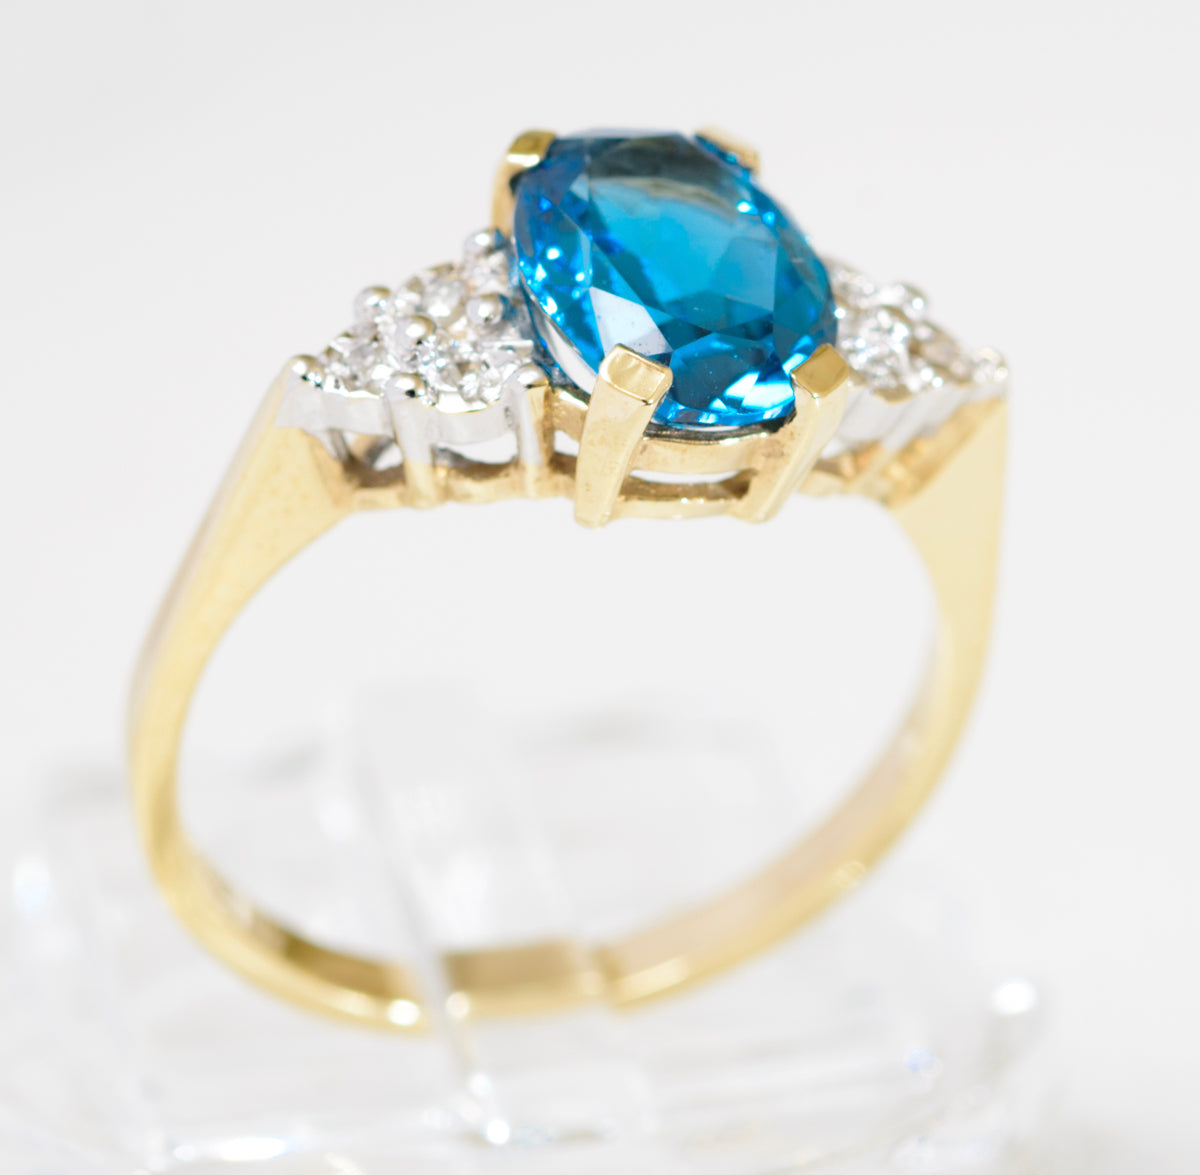 Vintage 9ct Gold Ring With Natural Blue Topaz & Diamond Gemstones (A1781)